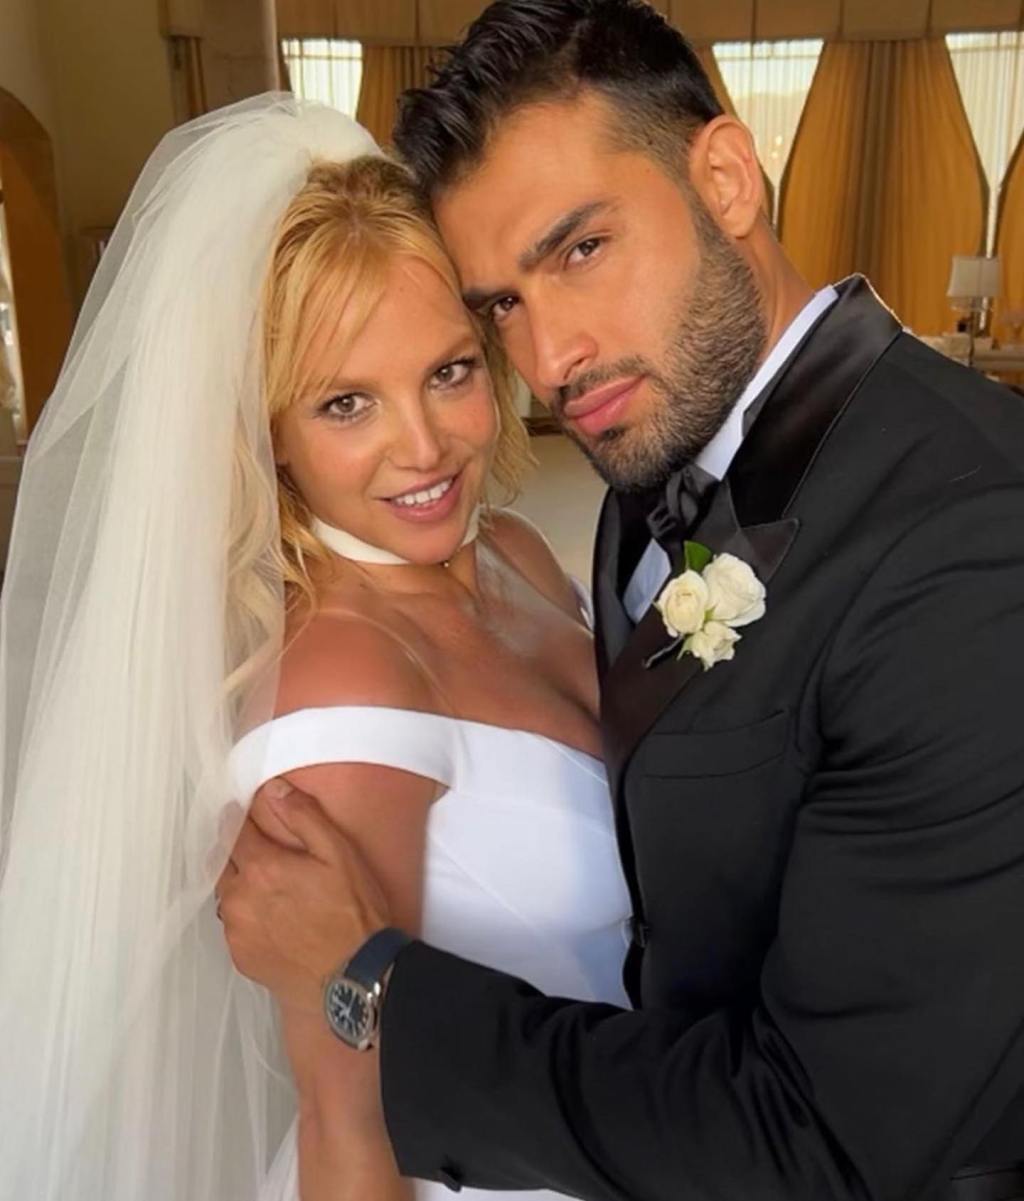 A photo of Britney Spears and Sam Asghari at their wedding